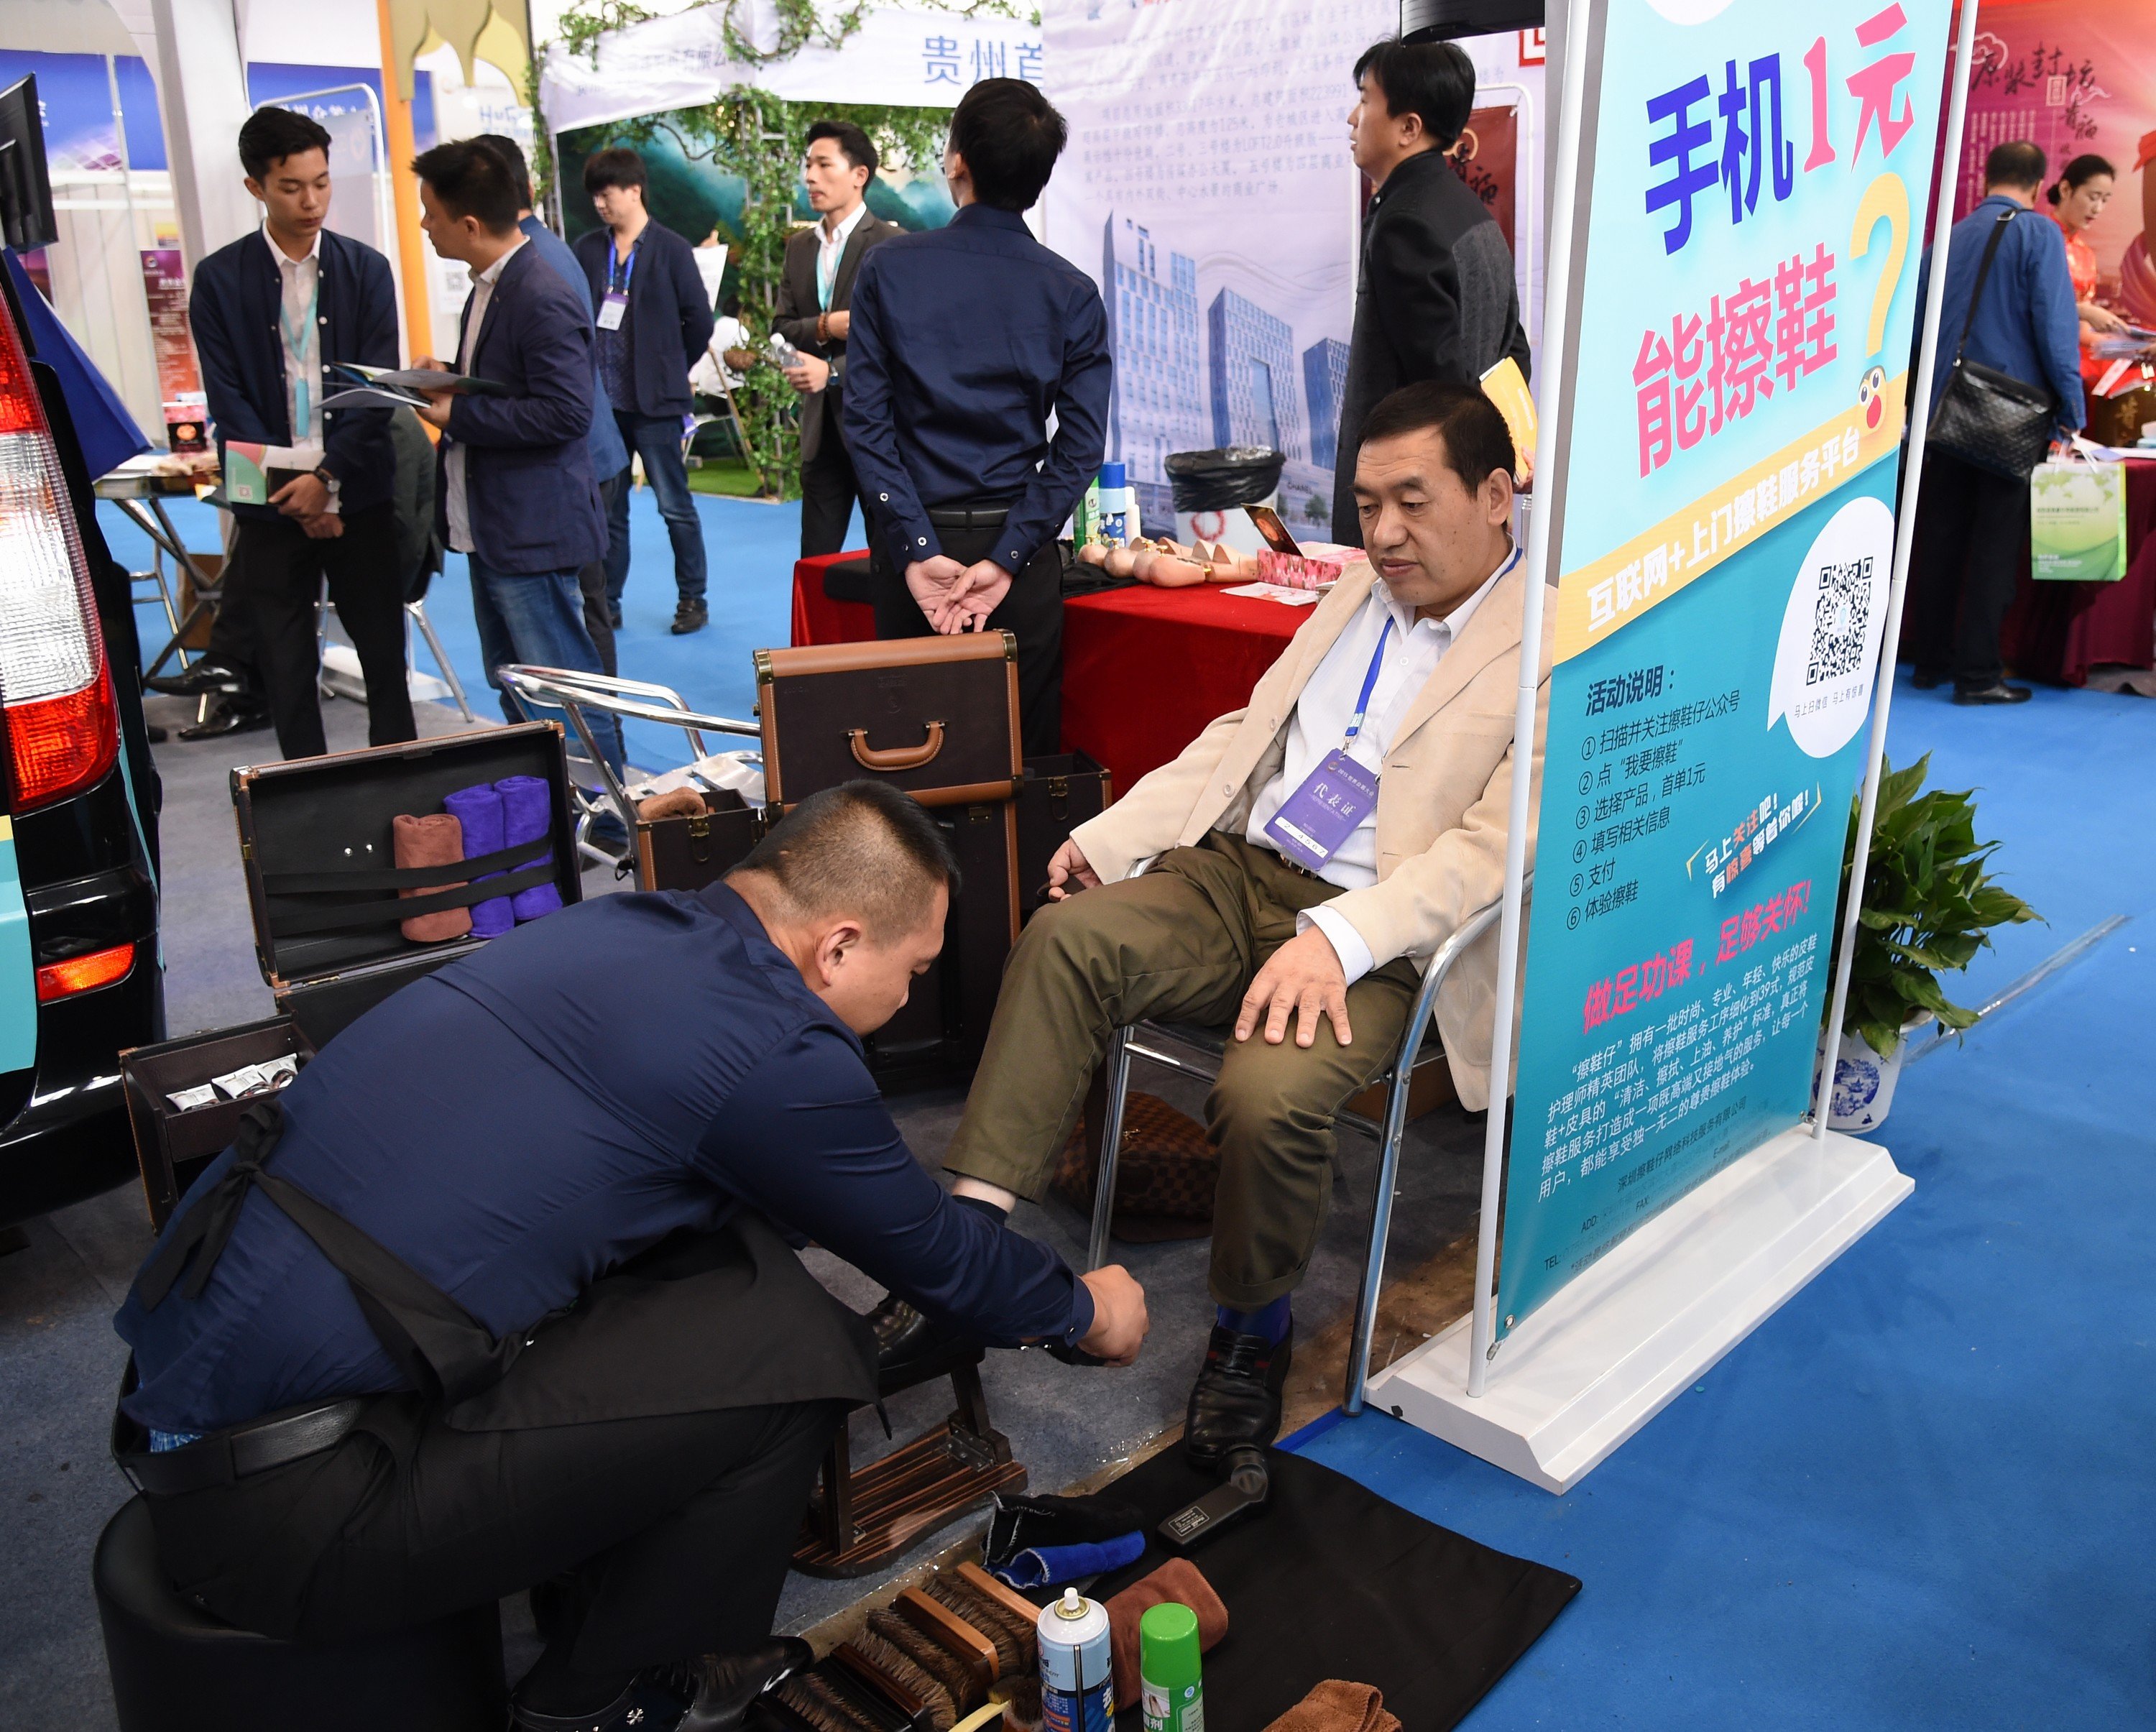 (151024) -- GUIYANG, Oct. 24, 2015 (Xinhua) -- A startup project is illustrated during the 2015 World Crowdfunding Conference which kicked off on Saturday in Guiyang, capital of southwest China's Guizhou Province, Oct. 24, 2015. The conference is held under the theme of "Promoting Entrepreneurship Innovation and Creatives" and aimed at providing a communication platform for the startup entrepreneurs and investors. (Xinhua/Liu Xu) (wsw)